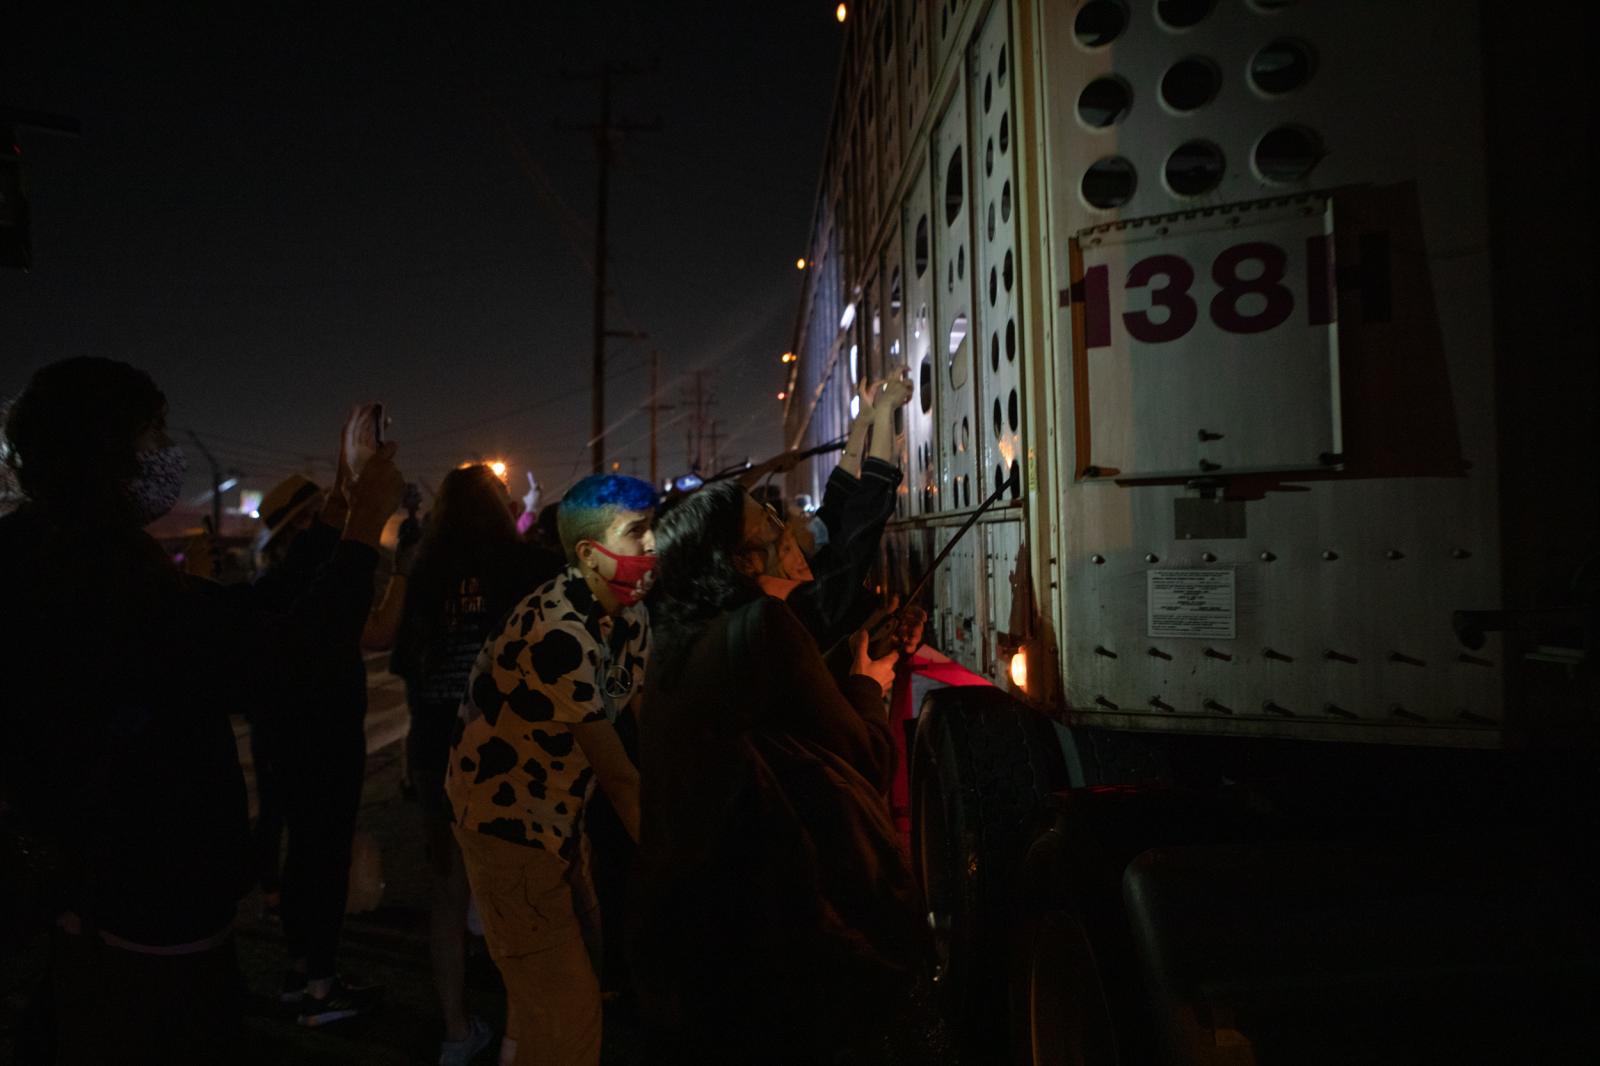 Activists approach a truck to f...d under the Farmer John label. 